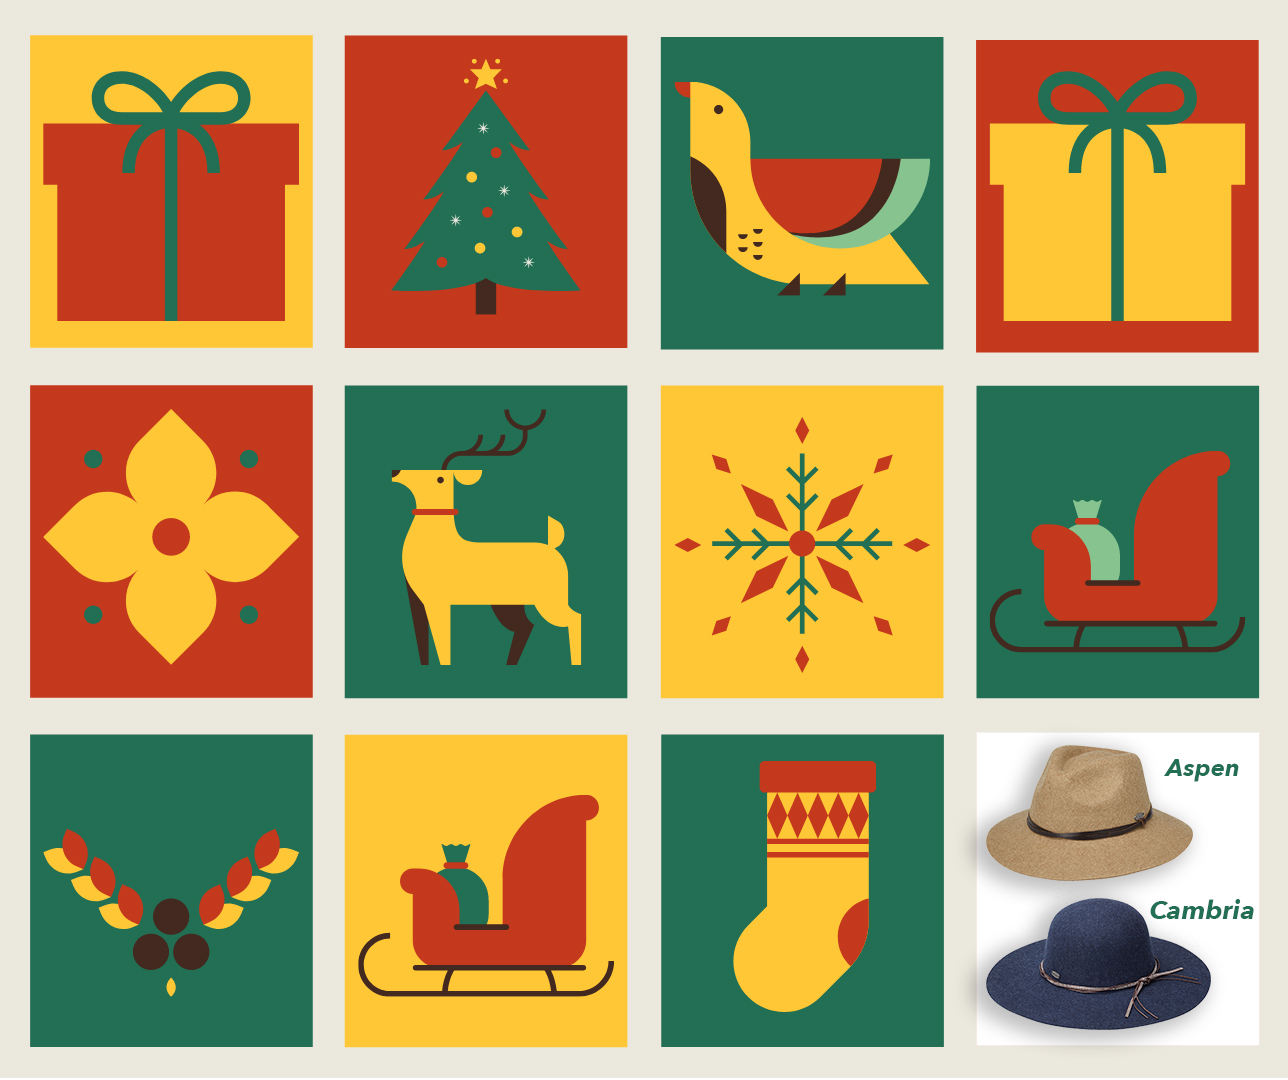 12 Days of Hats - 25% off Cambria and Aspen